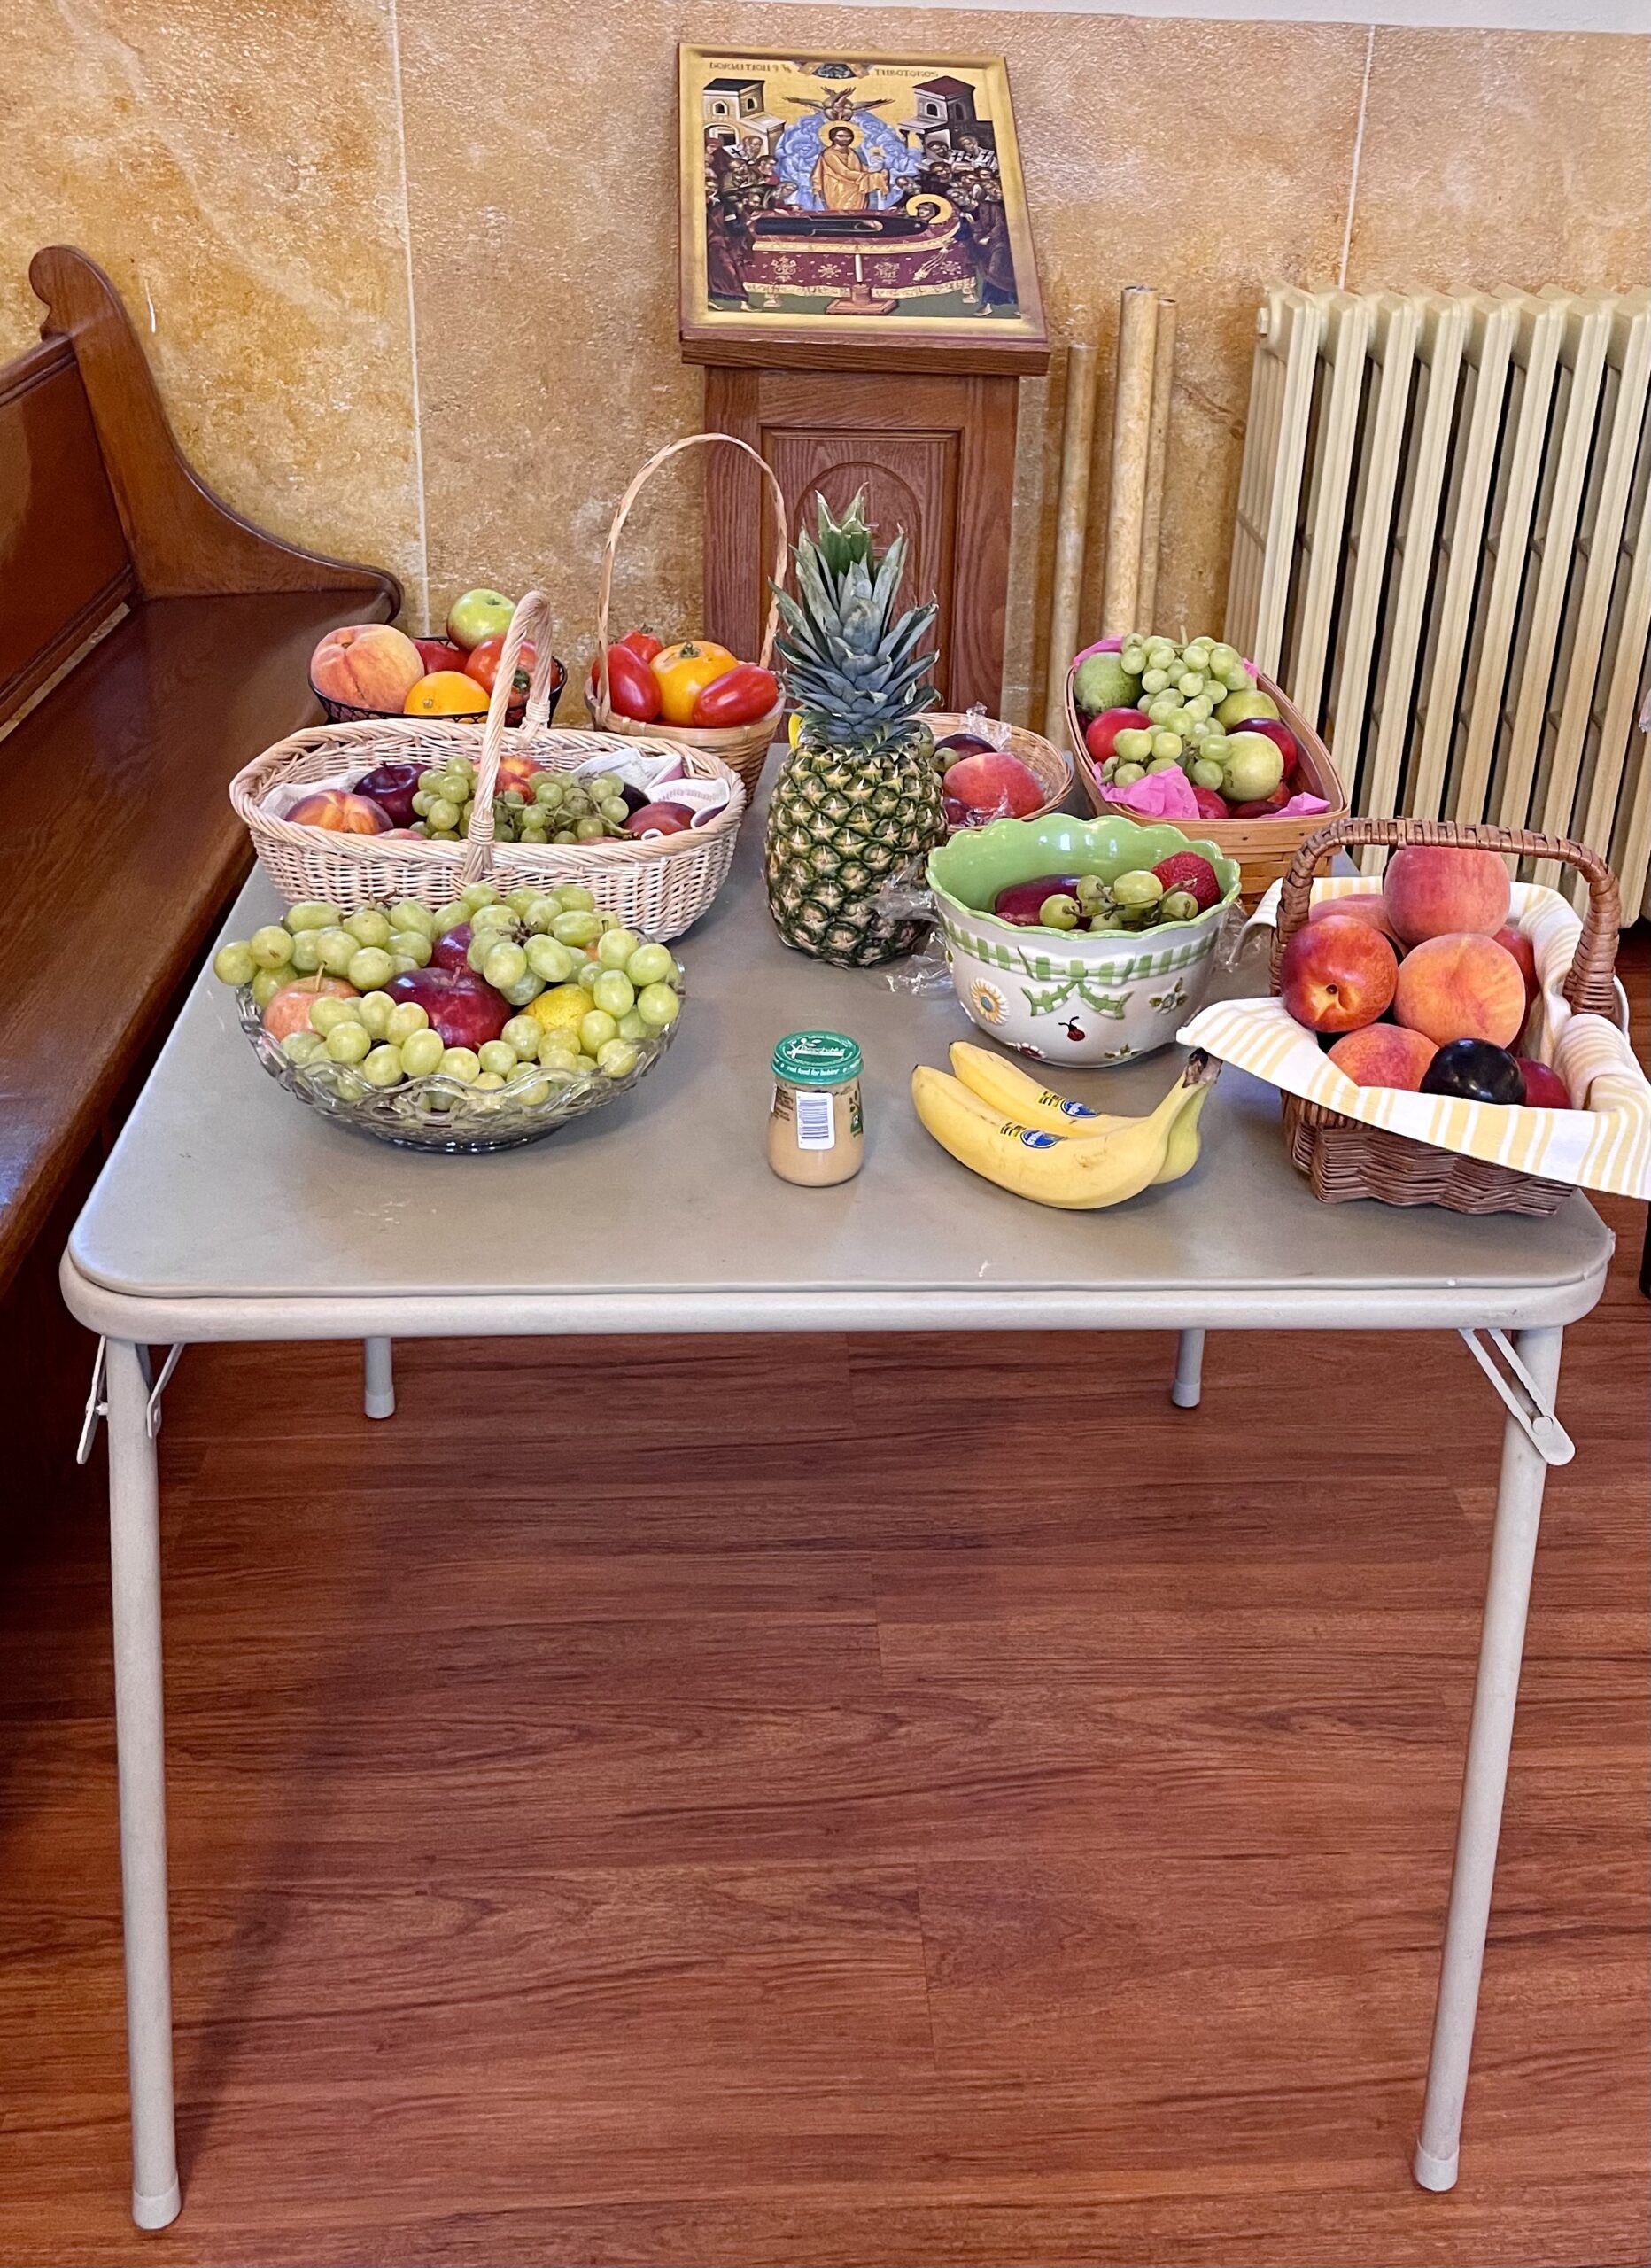 Table of blessed fruits in Orthodox church